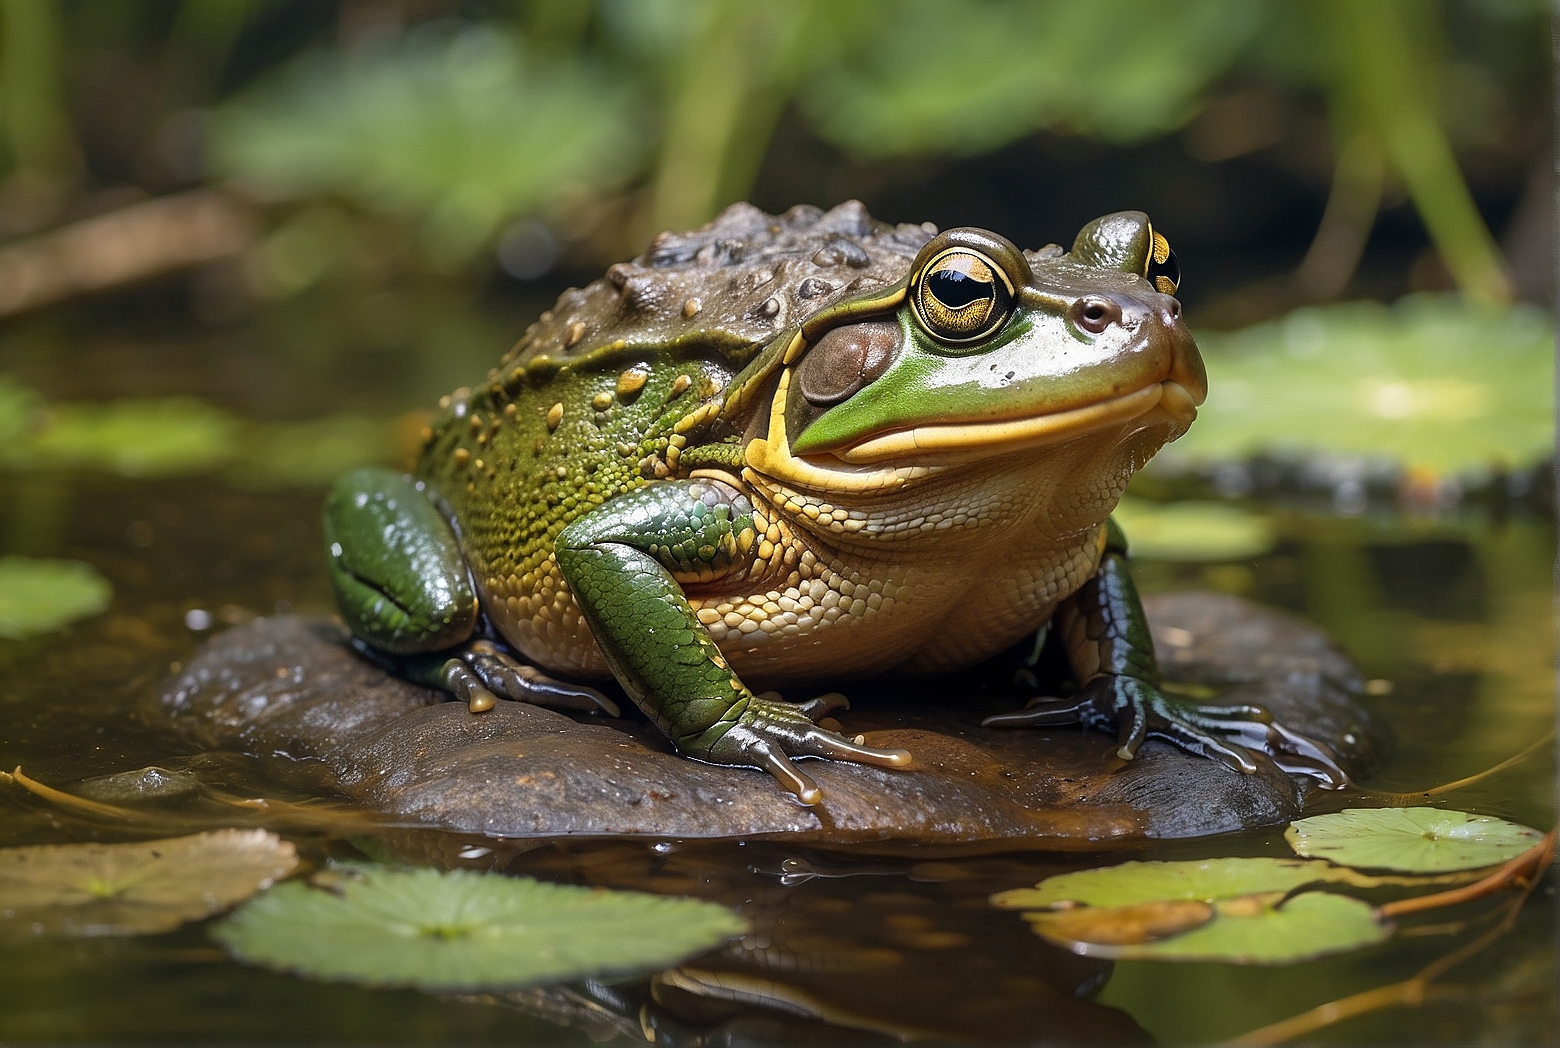 The Reproduction Cycle of Bullfrogs